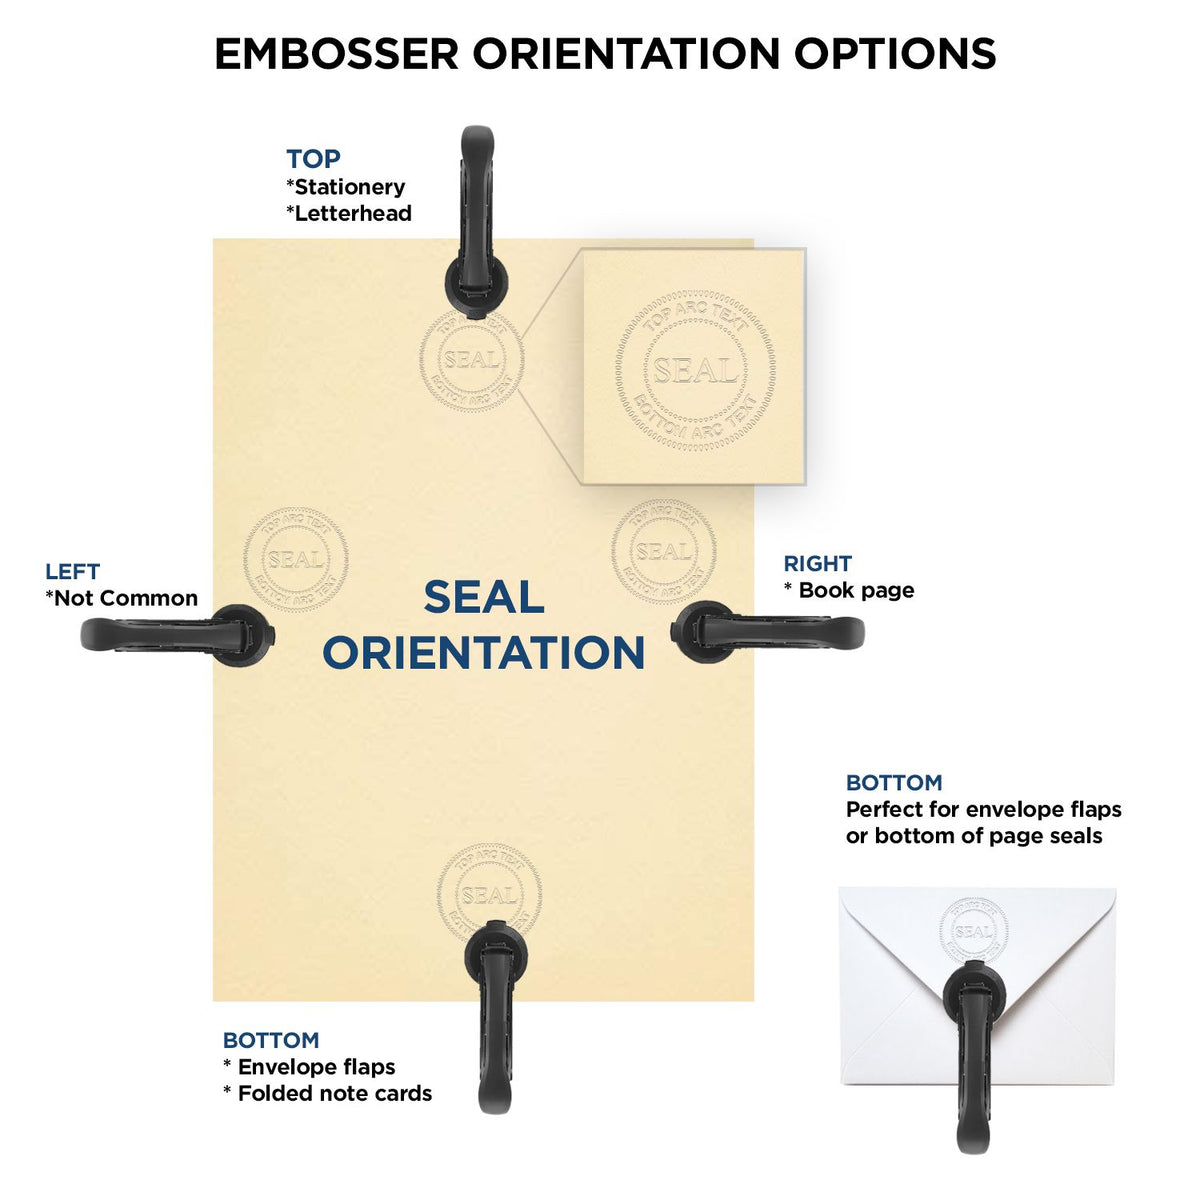 An infographic for the State of Maine Extended Long Reach Geologist Seal showing embosser orientation, this is showing examples of a top, bottom, right and left insert.